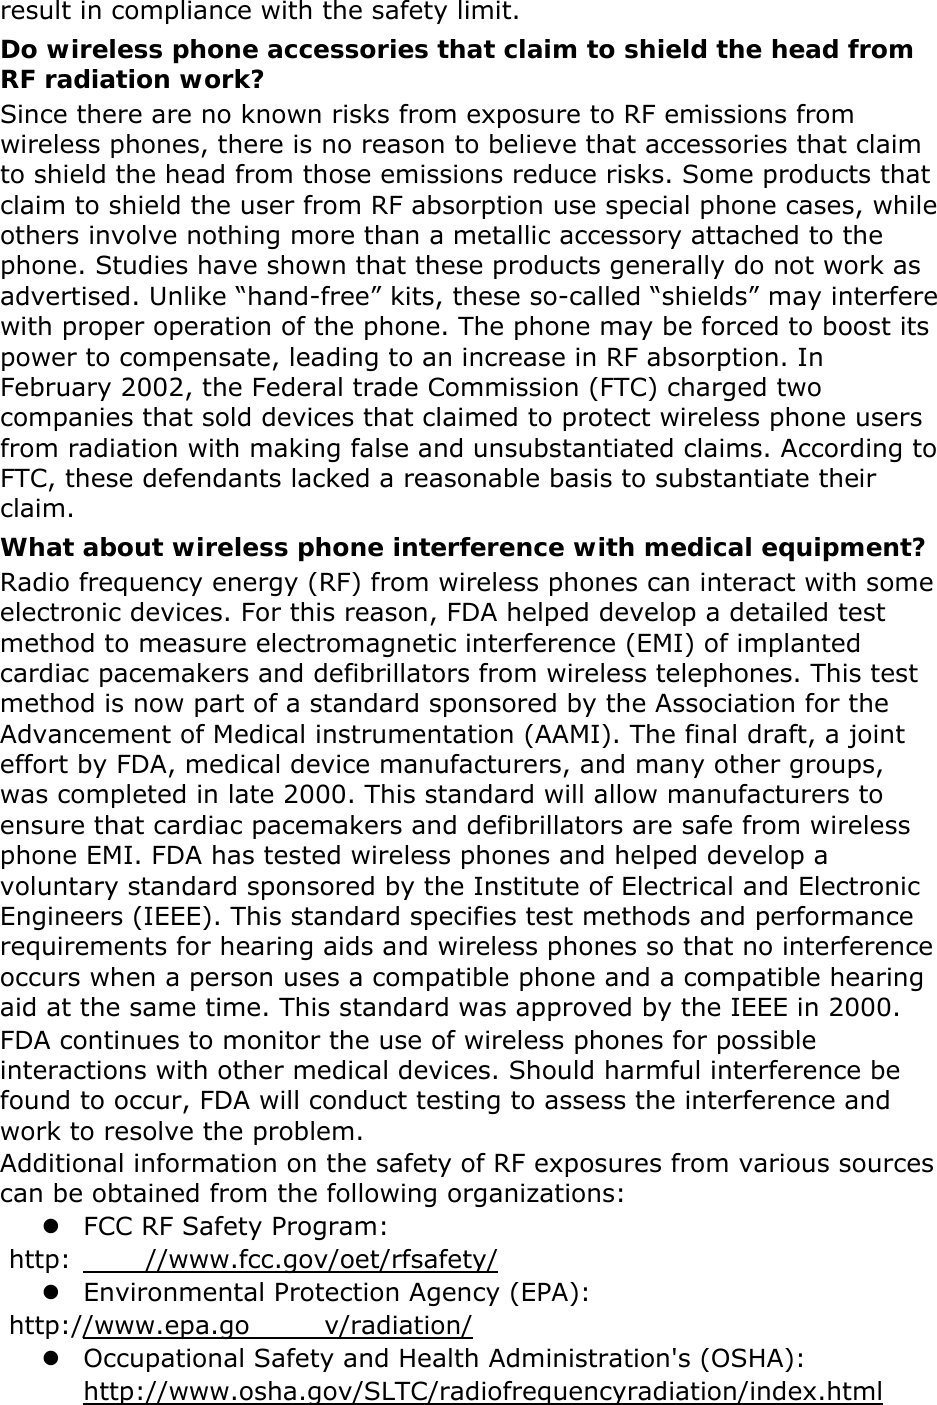 result in compliance with the safety limit. Do wireless phone accessories that claim to shield the head from RF radiation work? Since there are no known risks from exposure to RF emissions from wireless phones, there is no reason to believe that accessories that claim to shield the head from those emissions reduce risks. Some products that claim to shield the user from RF absorption use special phone cases, while others involve nothing more than a metallic accessory attached to the phone. Studies have shown that these products generally do not work as advertised. Unlike “hand-free” kits, these so-called “shields” may interfere with proper operation of the phone. The phone may be forced to boost its power to compensate, leading to an increase in RF absorption. In February 2002, the Federal trade Commission (FTC) charged two companies that sold devices that claimed to protect wireless phone users from radiation with making false and unsubstantiated claims. According to FTC, these defendants lacked a reasonable basis to substantiate their claim. What about wireless phone interference with medical equipment? Radio frequency energy (RF) from wireless phones can interact with some electronic devices. For this reason, FDA helped develop a detailed test method to measure electromagnetic interference (EMI) of implanted cardiac pacemakers and defibrillators from wireless telephones. This test method is now part of a standard sponsored by the Association for the Advancement of Medical instrumentation (AAMI). The final draft, a joint effort by FDA, medical device manufacturers, and many other groups, was completed in late 2000. This standard will allow manufacturers to ensure that cardiac pacemakers and defibrillators are safe from wireless phone EMI. FDA has tested wireless phones and helped develop a voluntary standard sponsored by the Institute of Electrical and Electronic Engineers (IEEE). This standard specifies test methods and performance requirements for hearing aids and wireless phones so that no interference occurs when a person uses a compatible phone and a compatible hearing aid at the same time. This standard was approved by the IEEE in 2000. FDA continues to monitor the use of wireless phones for possible interactions with other medical devices. Should harmful interference be found to occur, FDA will conduct testing to assess the interference and work to resolve the problem. Additional information on the safety of RF exposures from various sources can be obtained from the following organizations: z FCC RF Safety Program:  http: //www.fcc.gov/oet/rfsafety/ z Environmental Protection Agency (EPA):  http://www.epa.go v/radiation/ z Occupational Safety and Health Administration&apos;s (OSHA):         http://www.osha.gov/SLTC/radiofrequencyradiation/index.html 